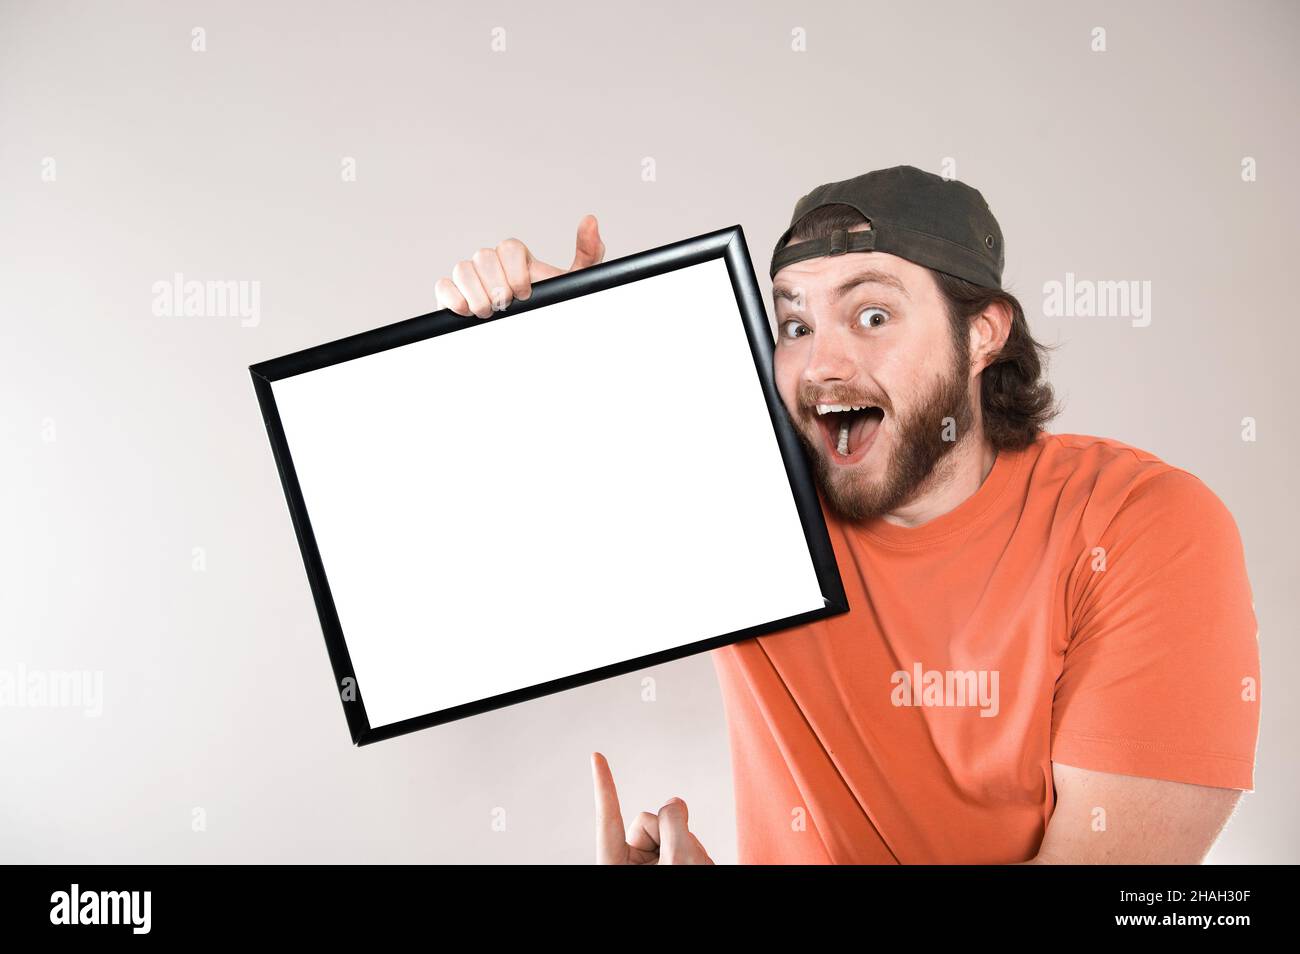 Young bearded man making funny face, holding a blank sign board. Studio shot on gray background. Stock Photo